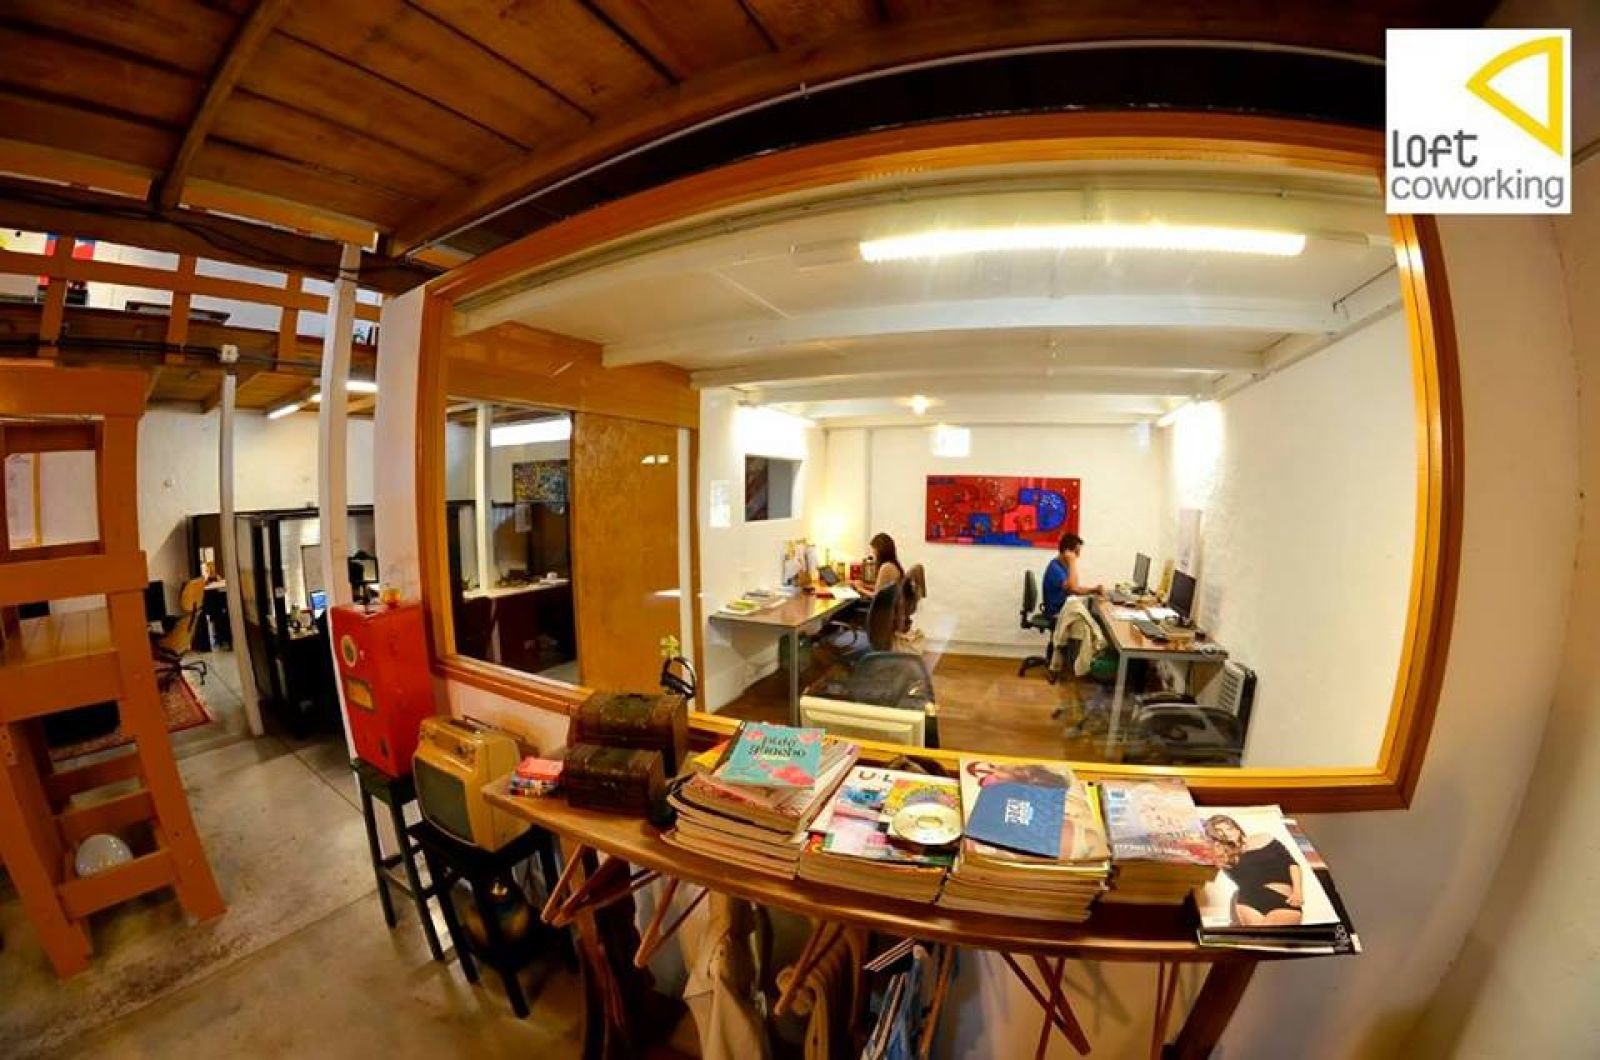 Loft Coworking / South America / Latin America / Argentina / Buenos Aires